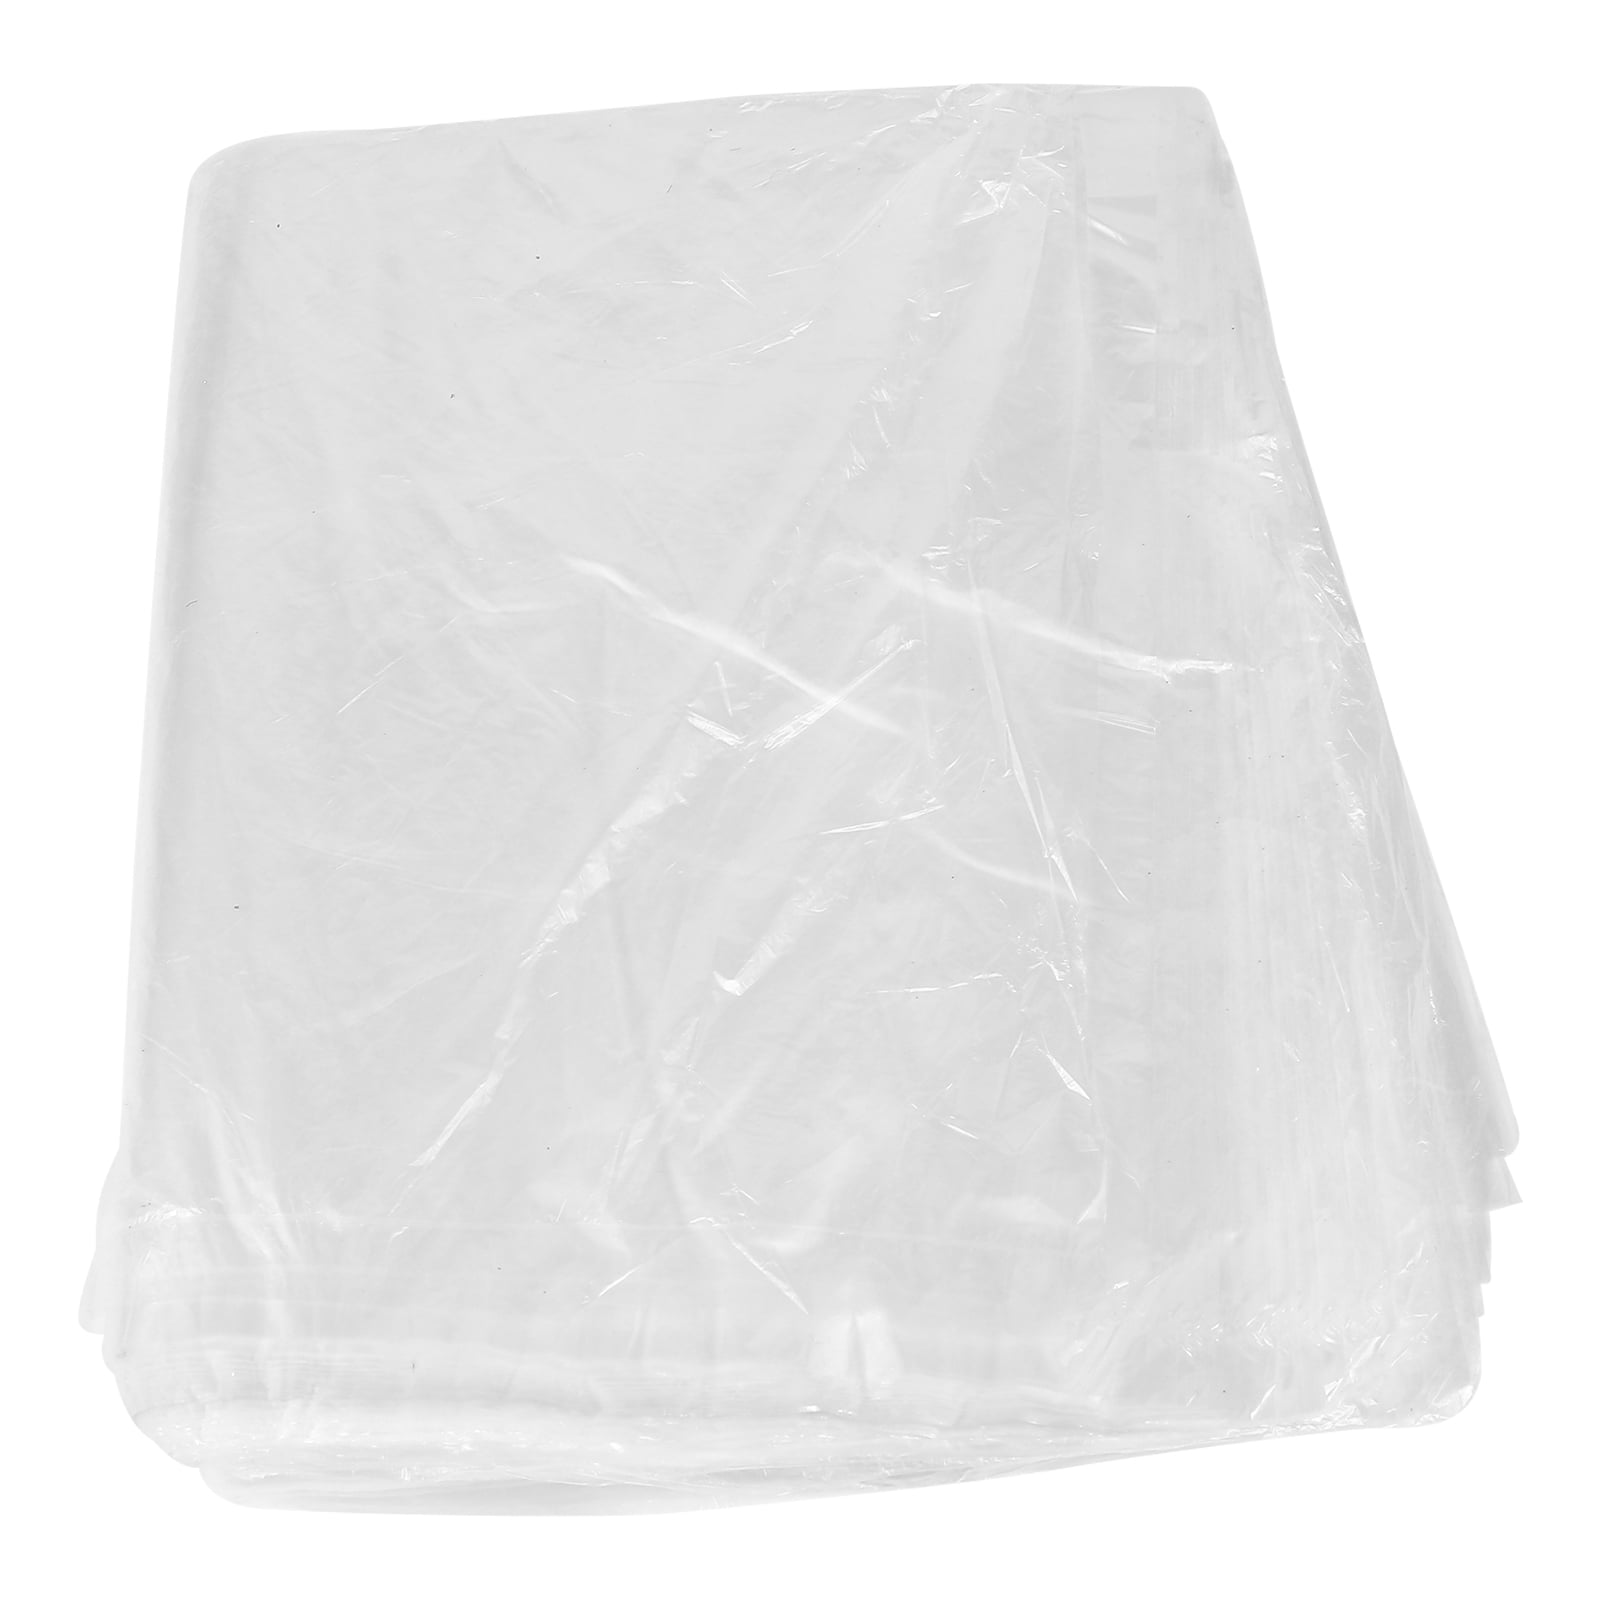 BAG INC transparent polythene bags 16x20 self adhesive, polybag for packing  clothes, 50 pcs : Amazon.in: Industrial & Scientific